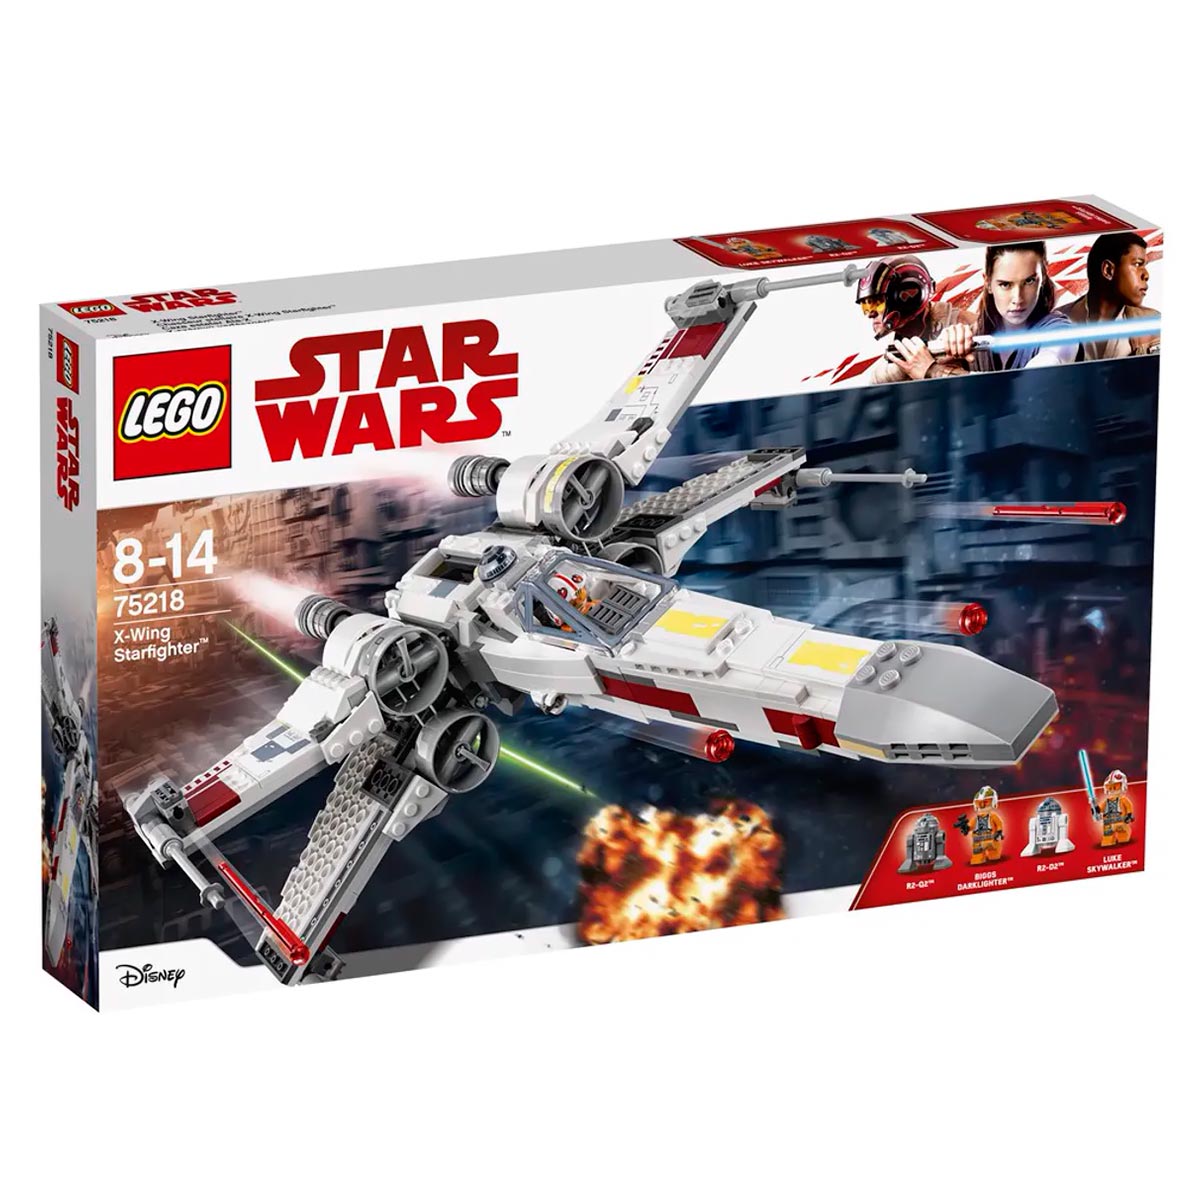 LEGO Star Wars - A Nave X-Wing - 75218